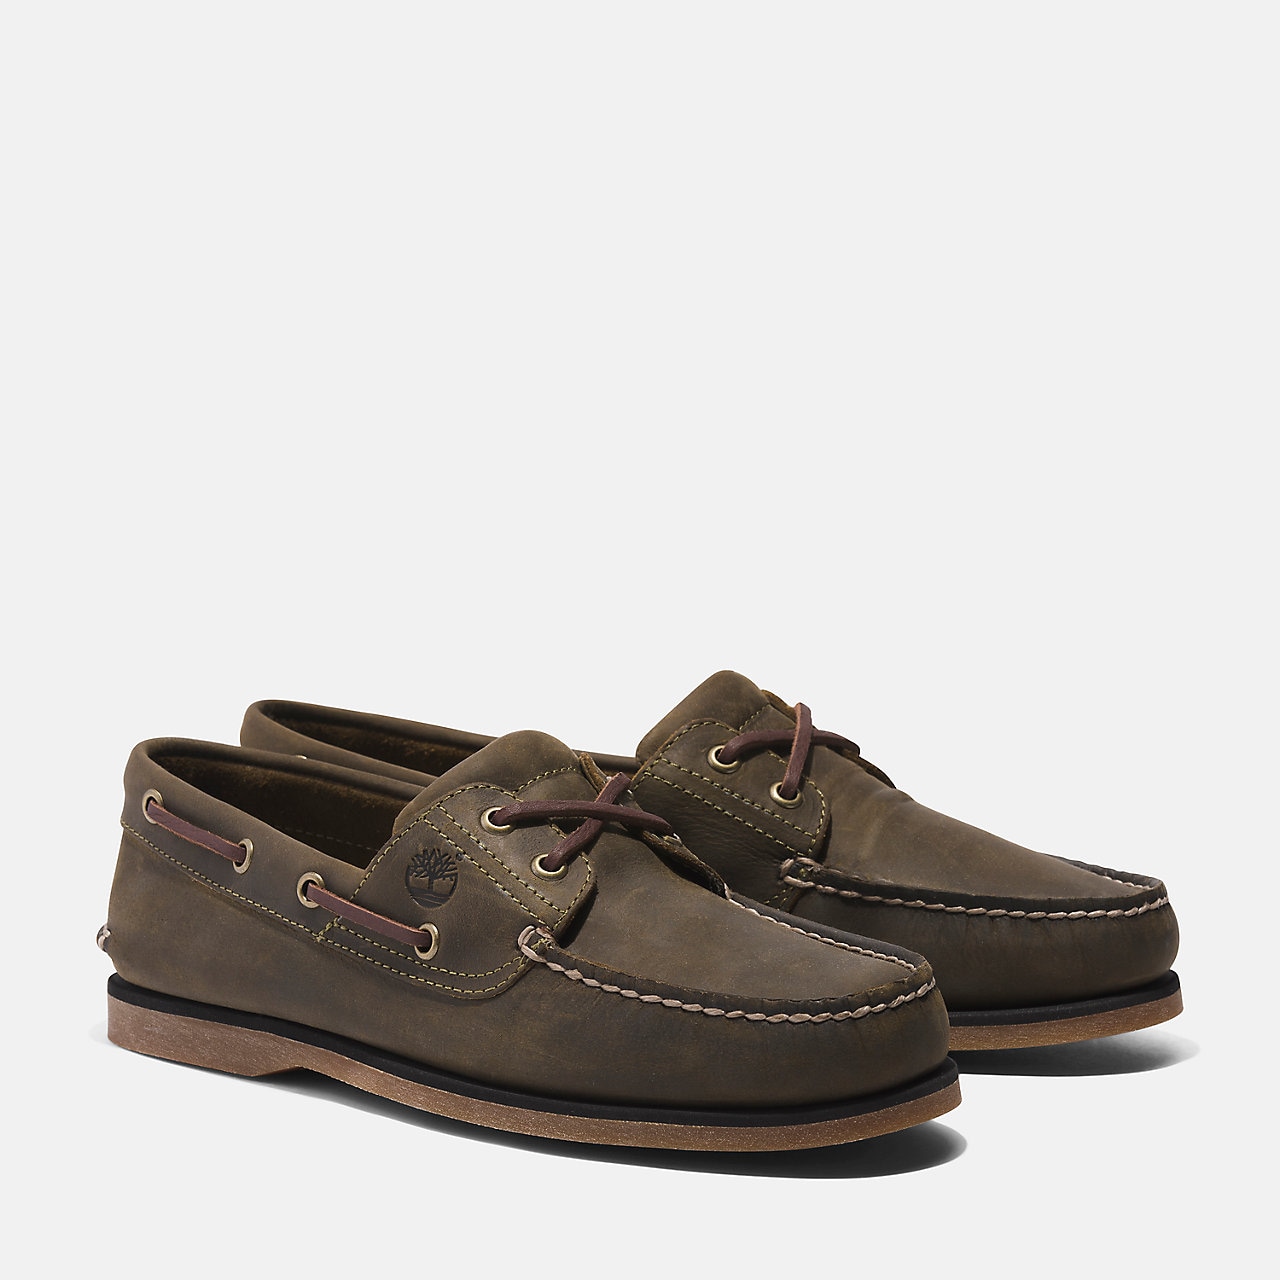 Timberland Bootsschuh "CLASSIC BOAT BOAT SHOE"